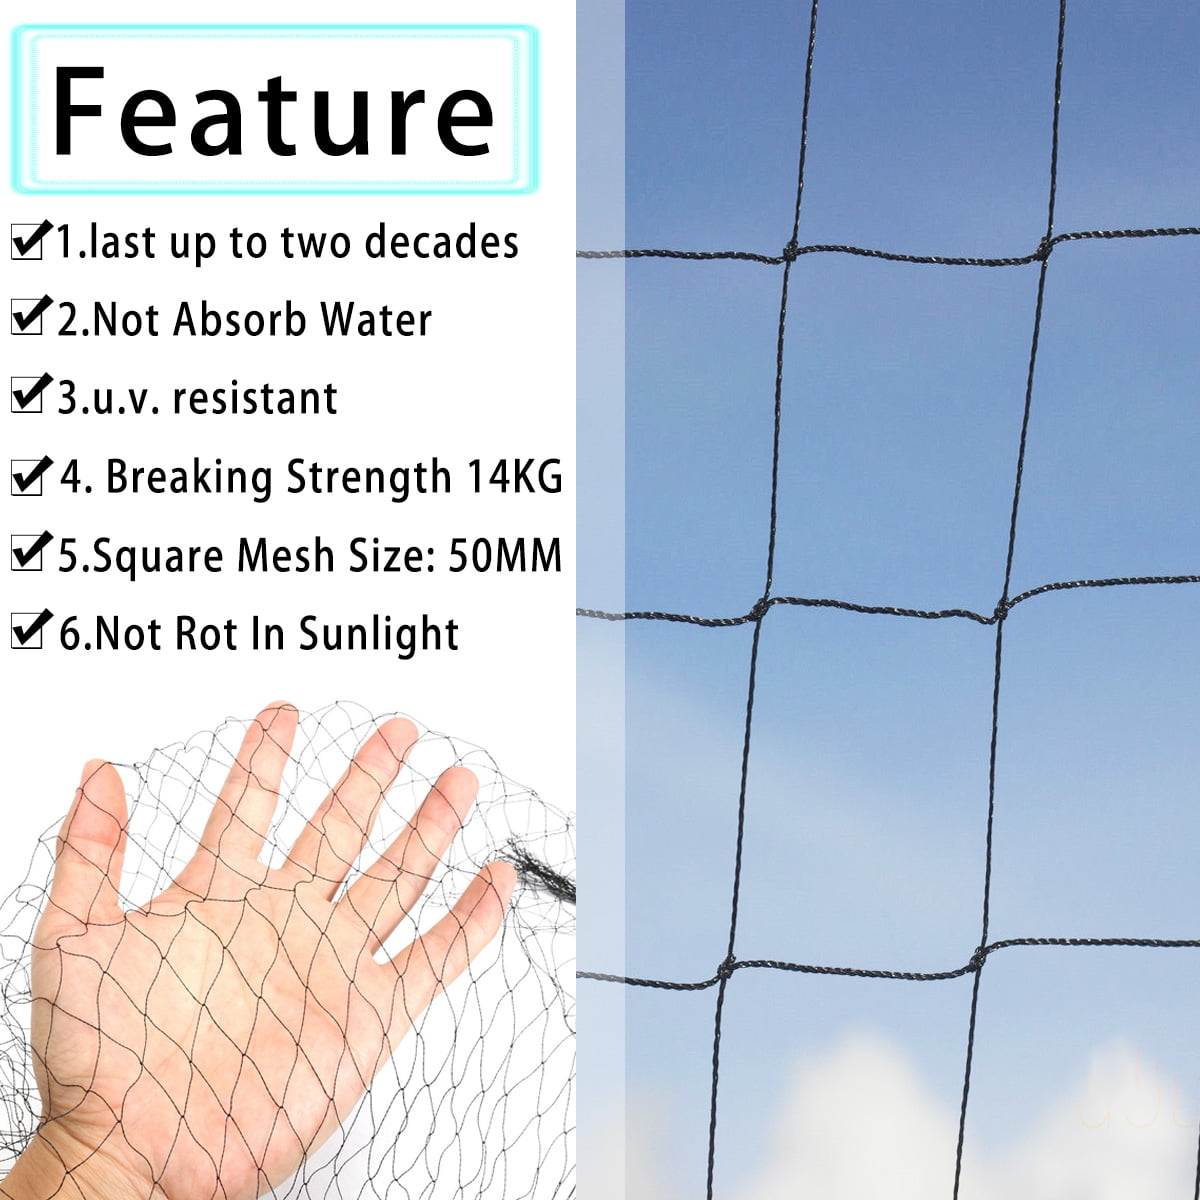 50 X 50 Net Netting for Bird Poultry Aviary Game Pens New 2.4 Square Mesh Size Garden Netting to Protect Fruit Trees Plants and Vegetables 